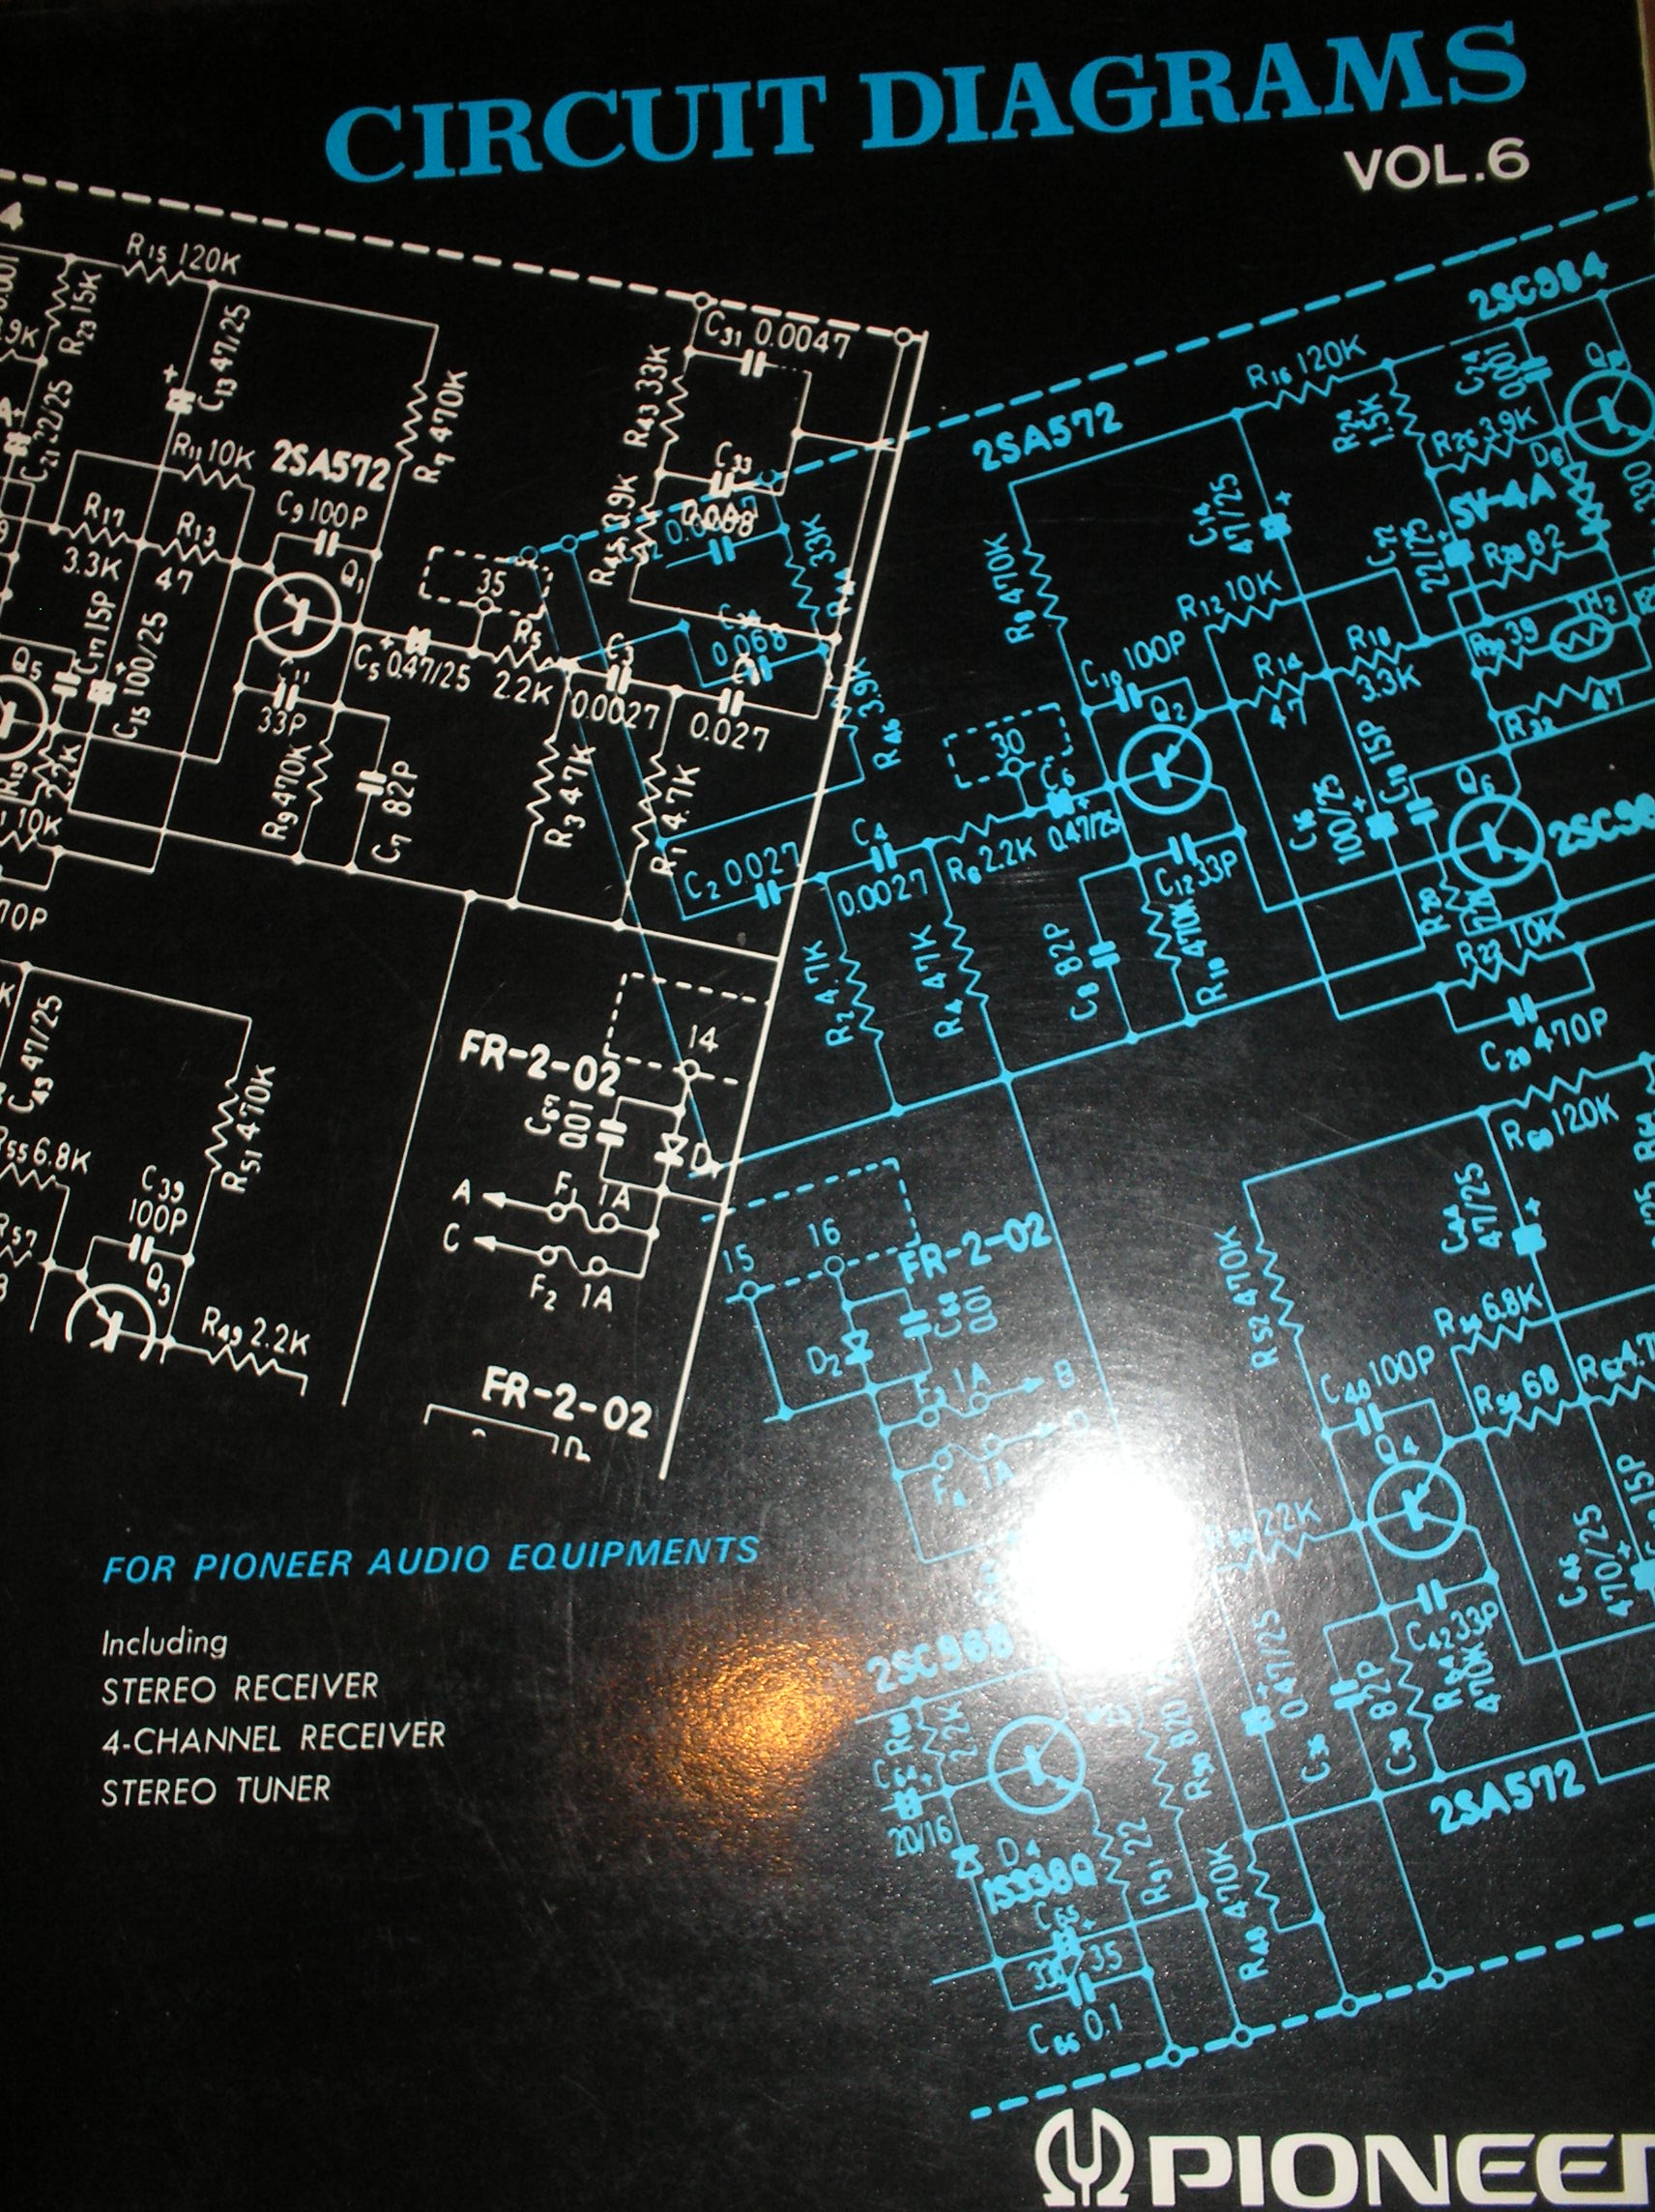 TX-5300 Stereo Tuner fold out schematics  PIONEER SCHEMATIC MANUALS